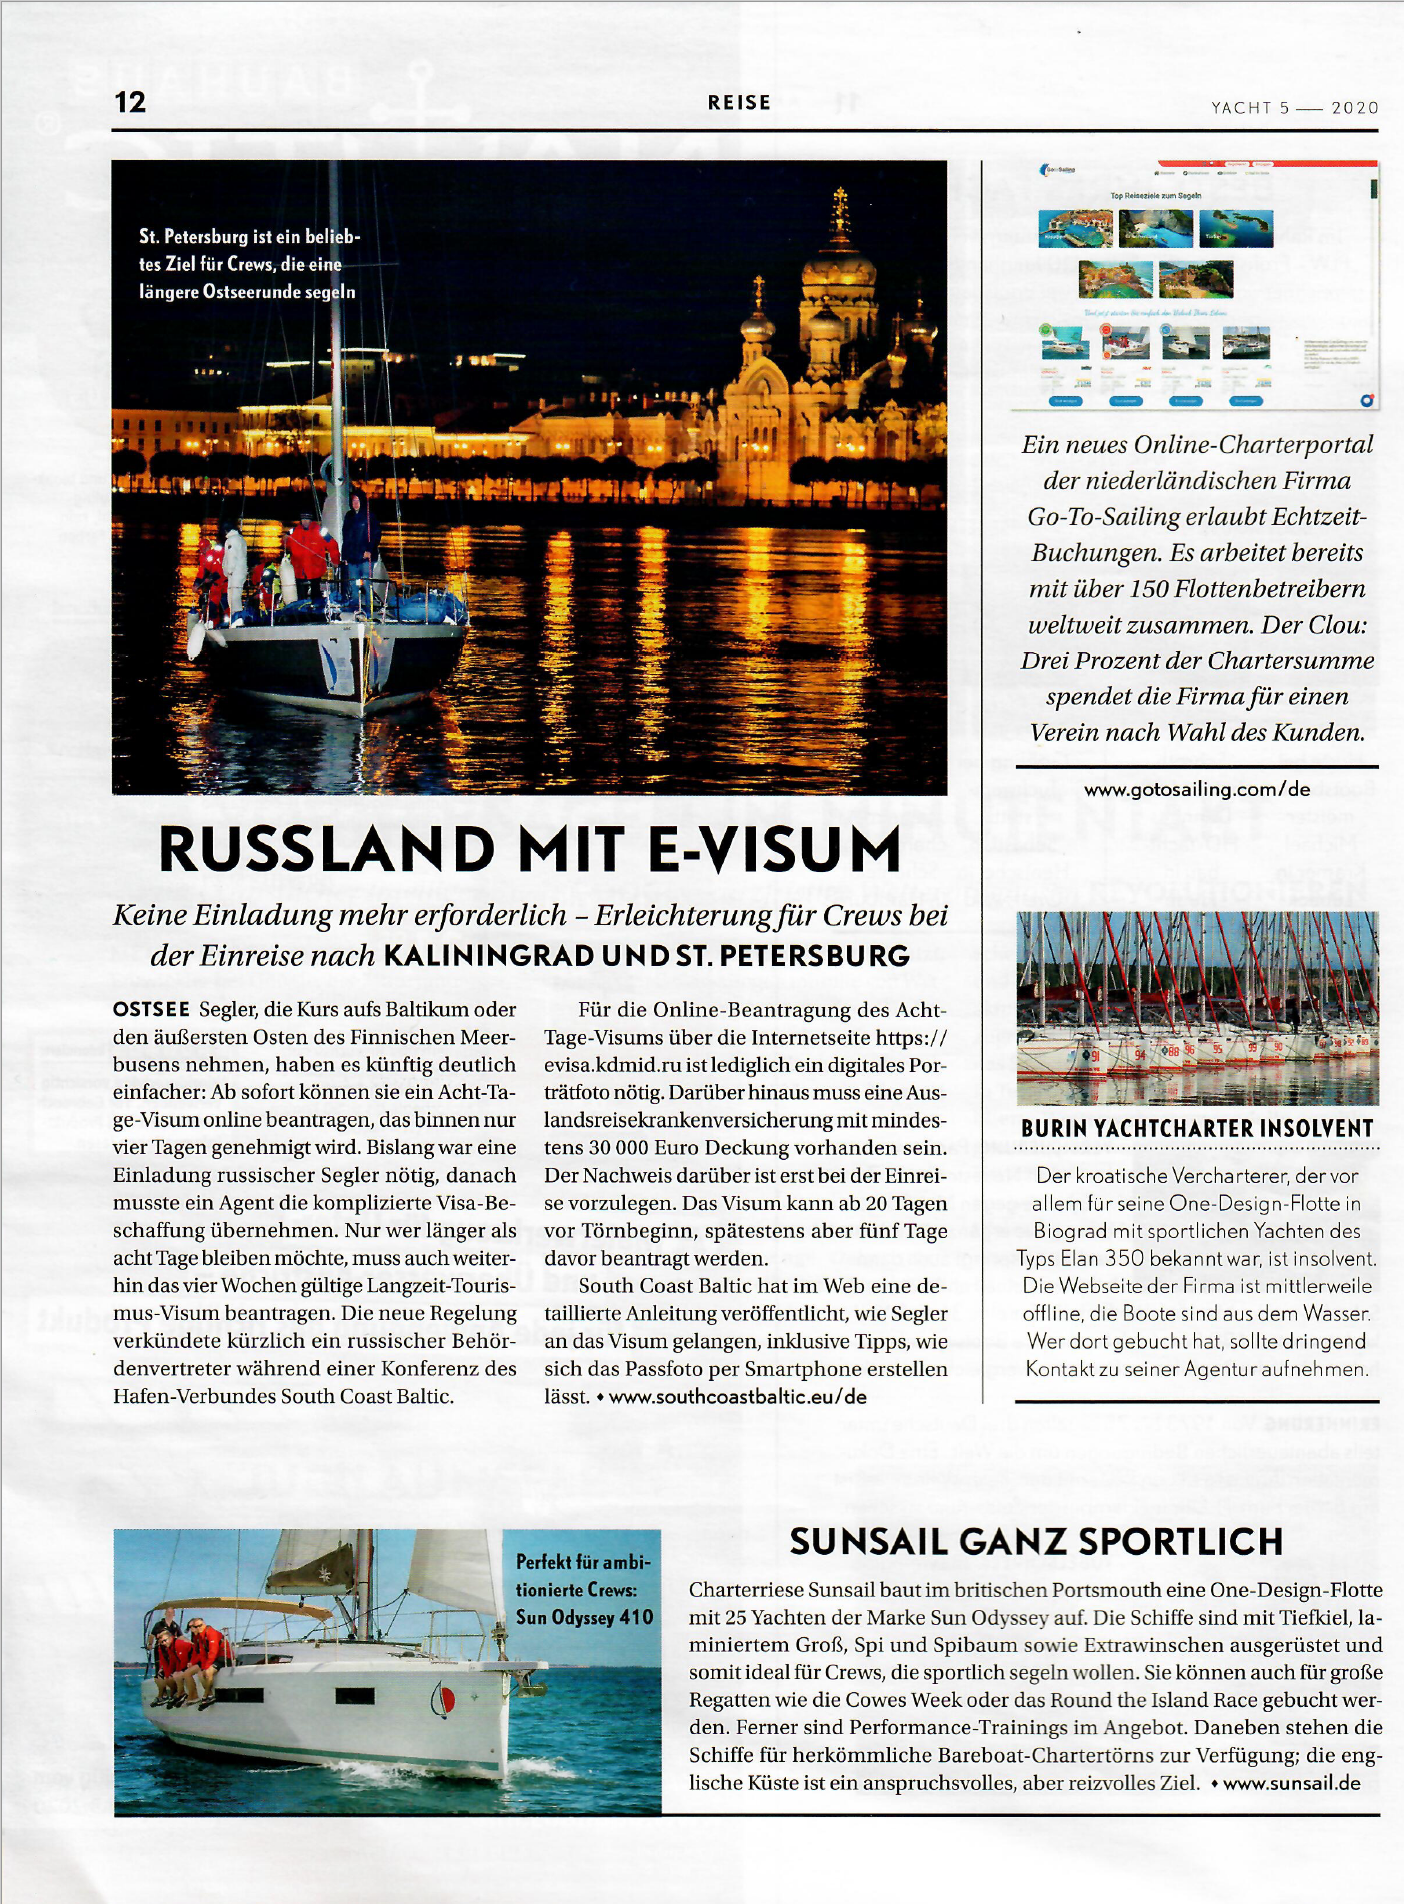 GotoSailing.com featured in the Yacht magazine